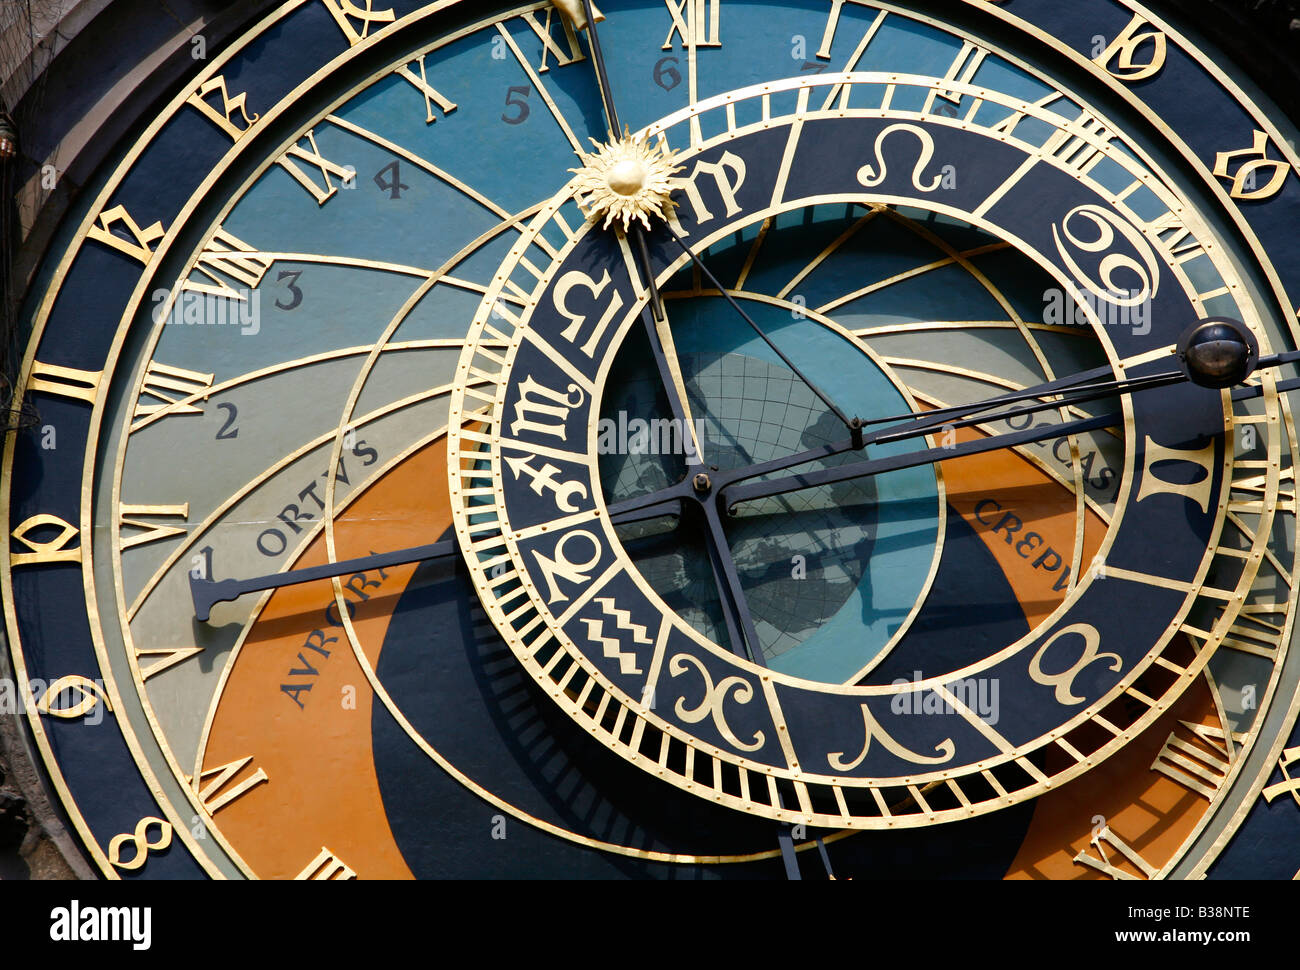 Aug 2008 - The Astronomical clock in the Old Town Hall Prague Czech Republic Stock Photo